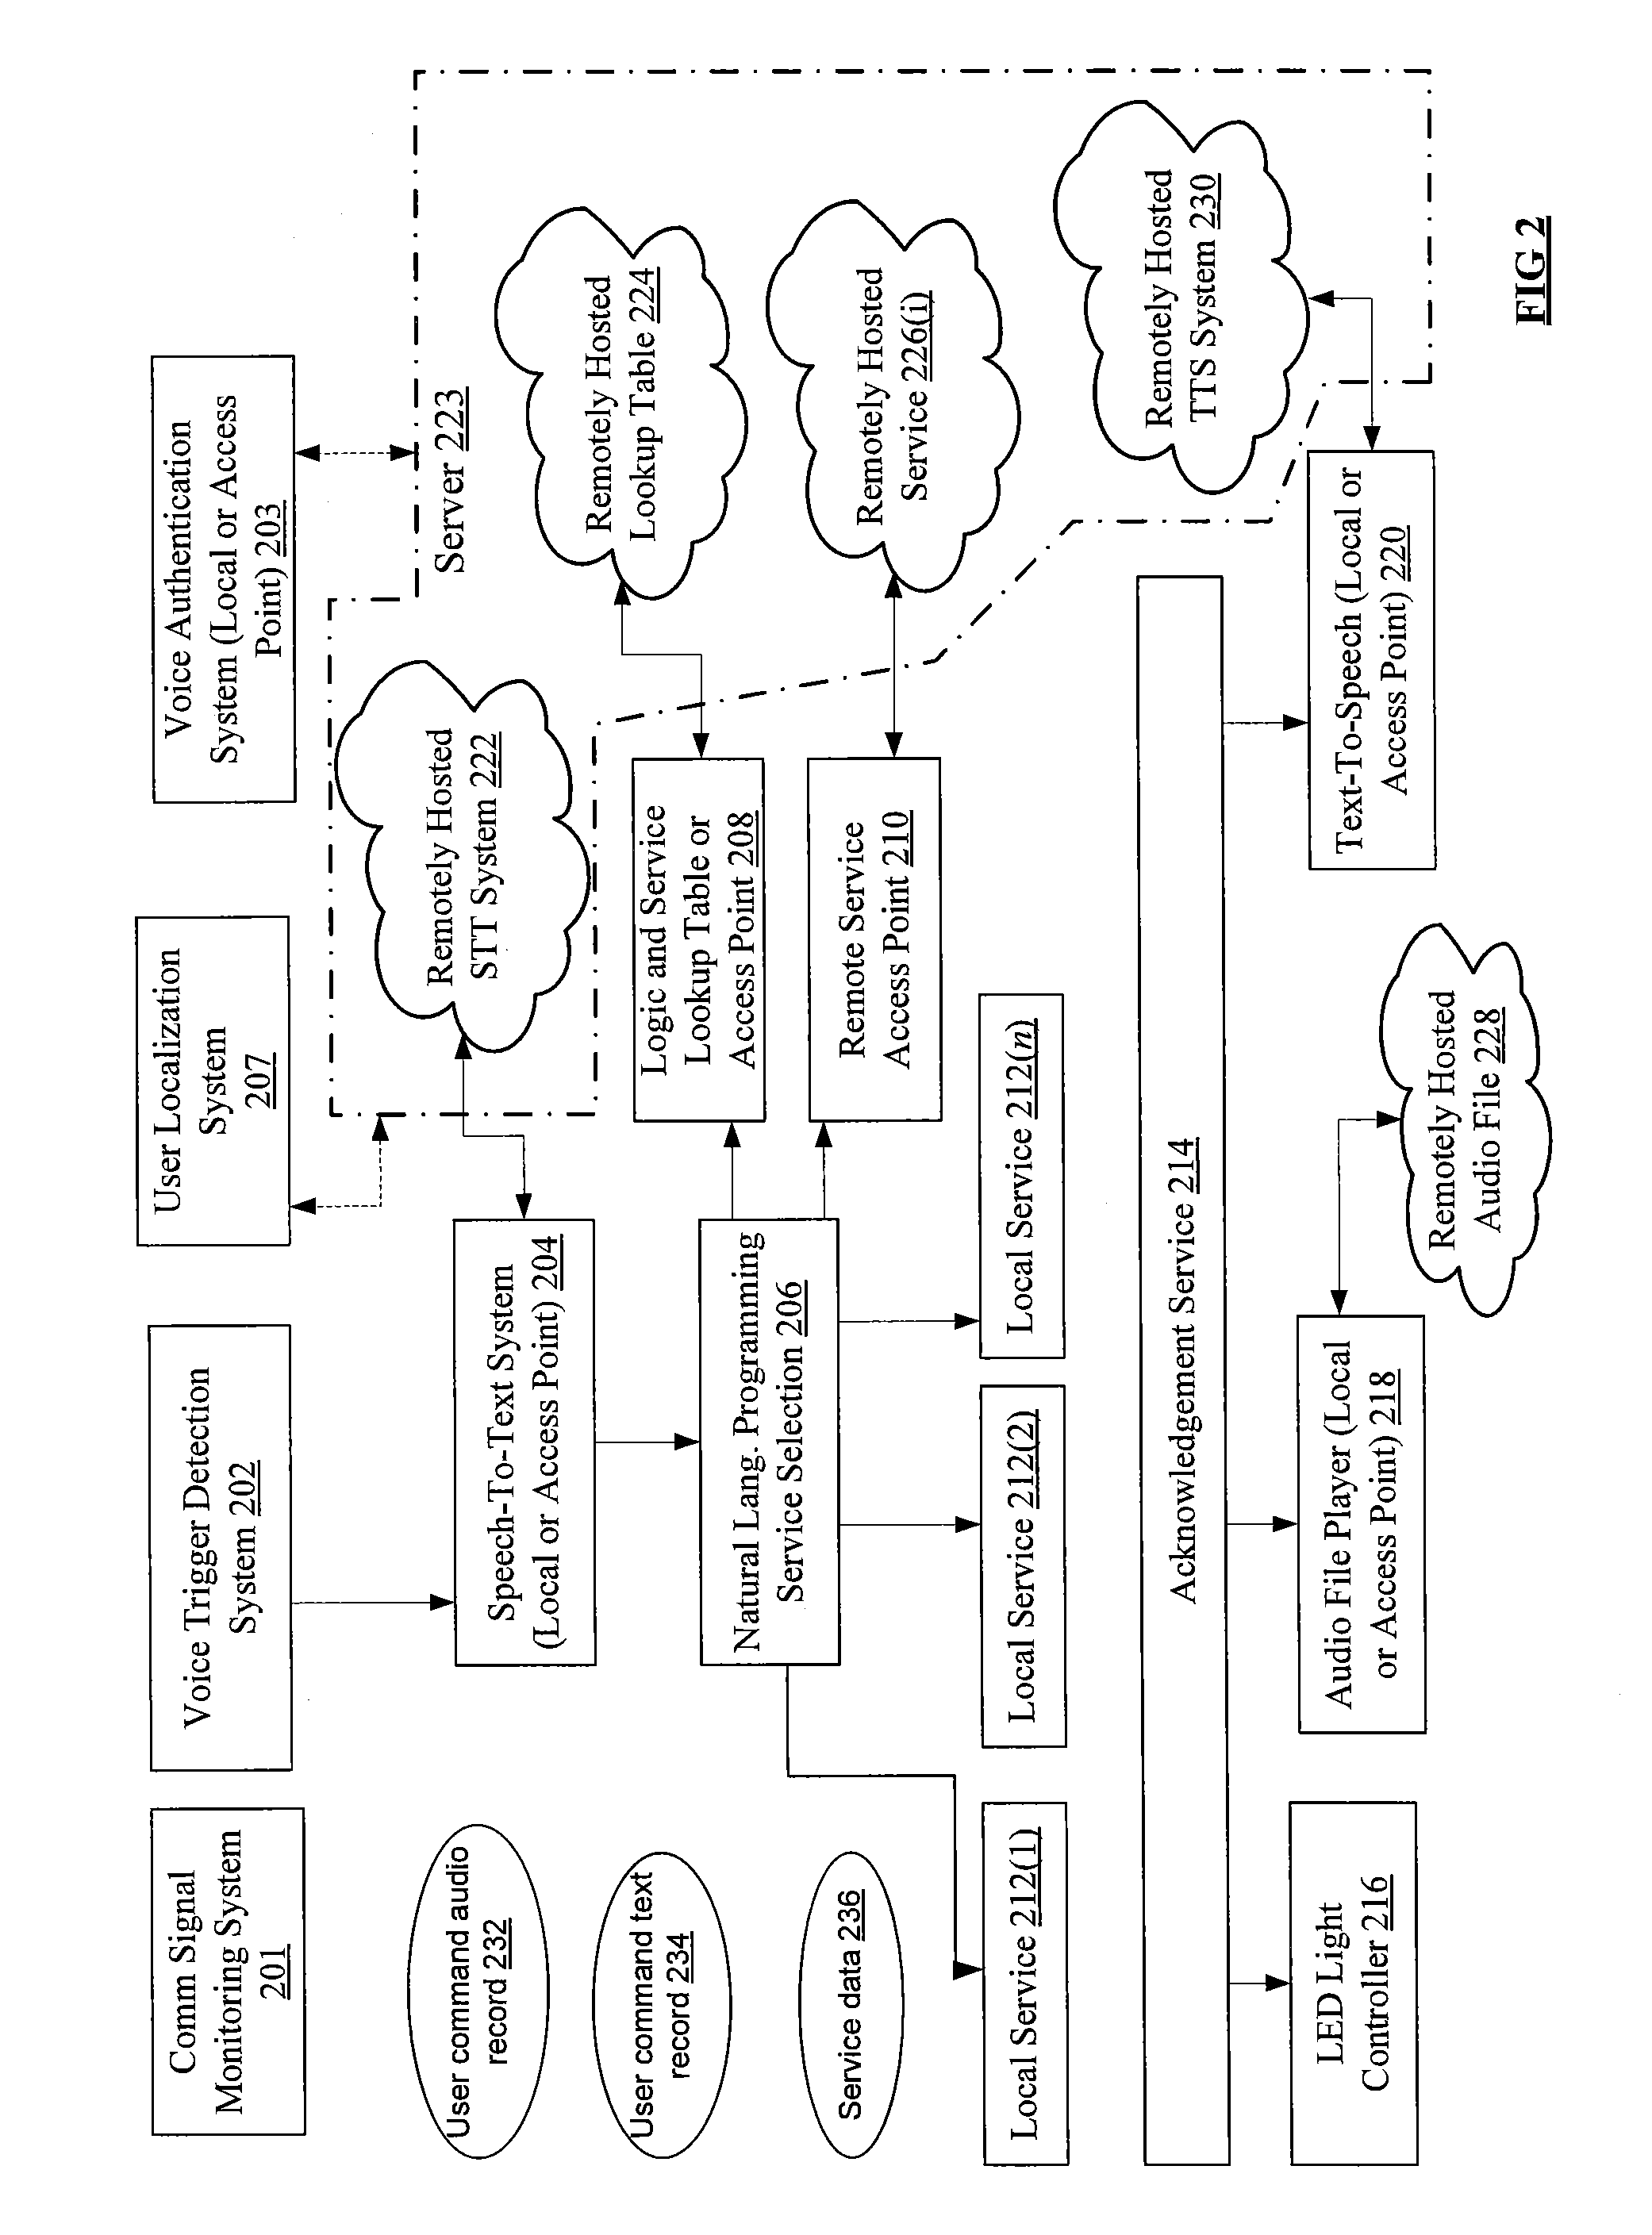 Voice-Operated Internet-Ready Ubiquitous Computing Device and Method Thereof